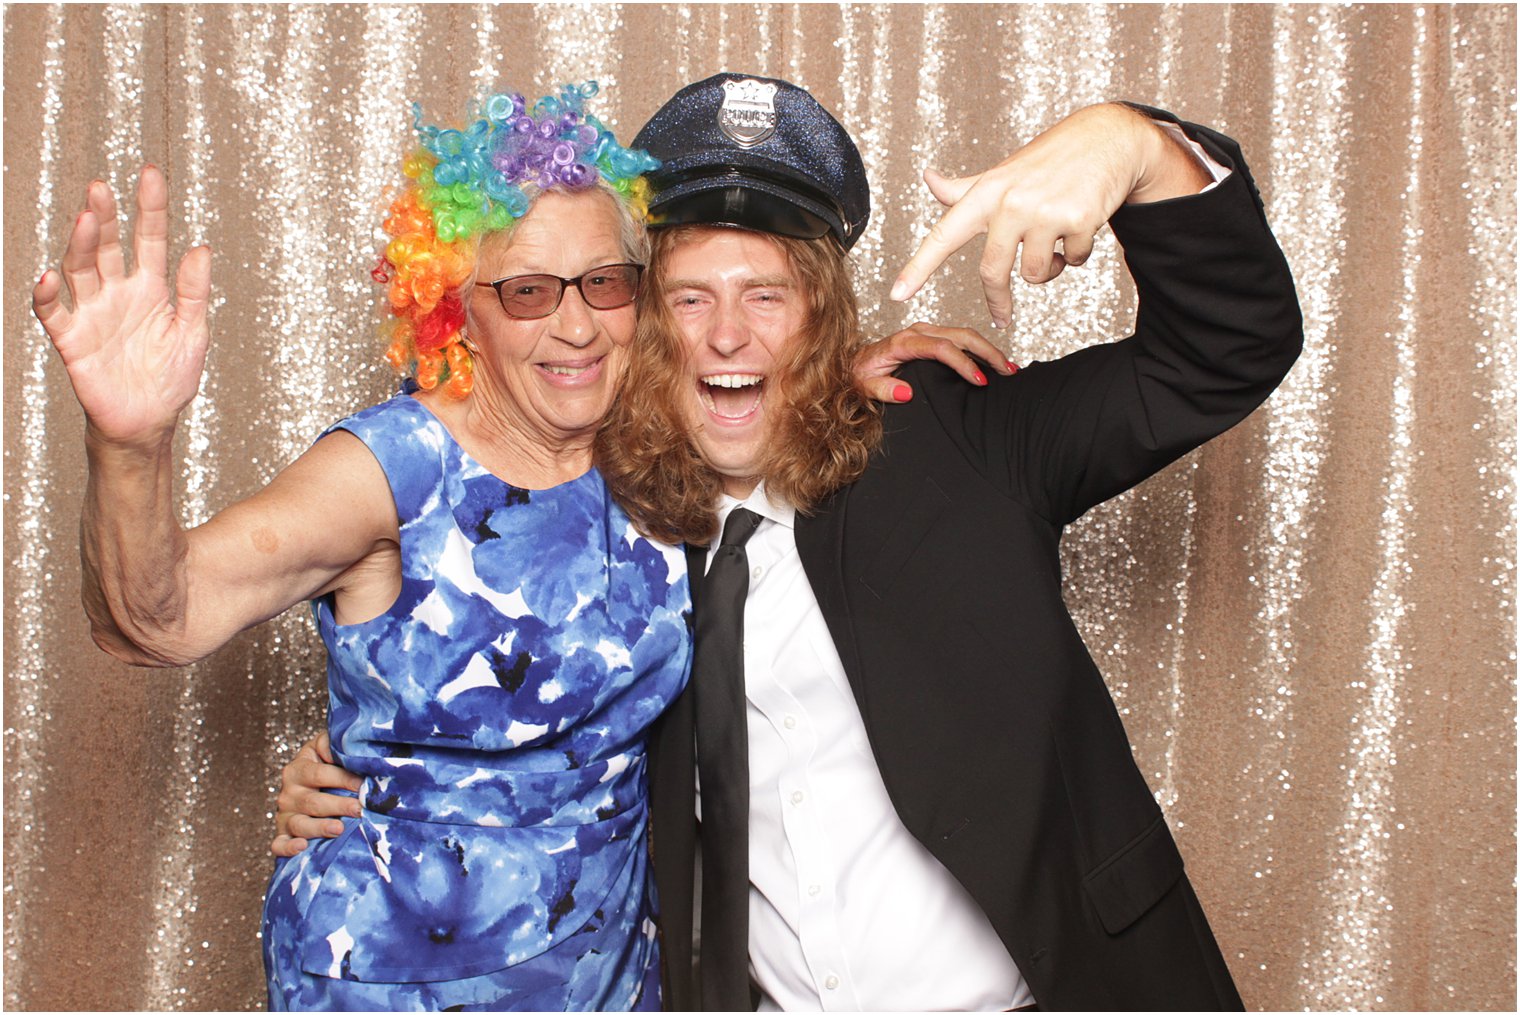 grandmother and grandson pose in photo booth